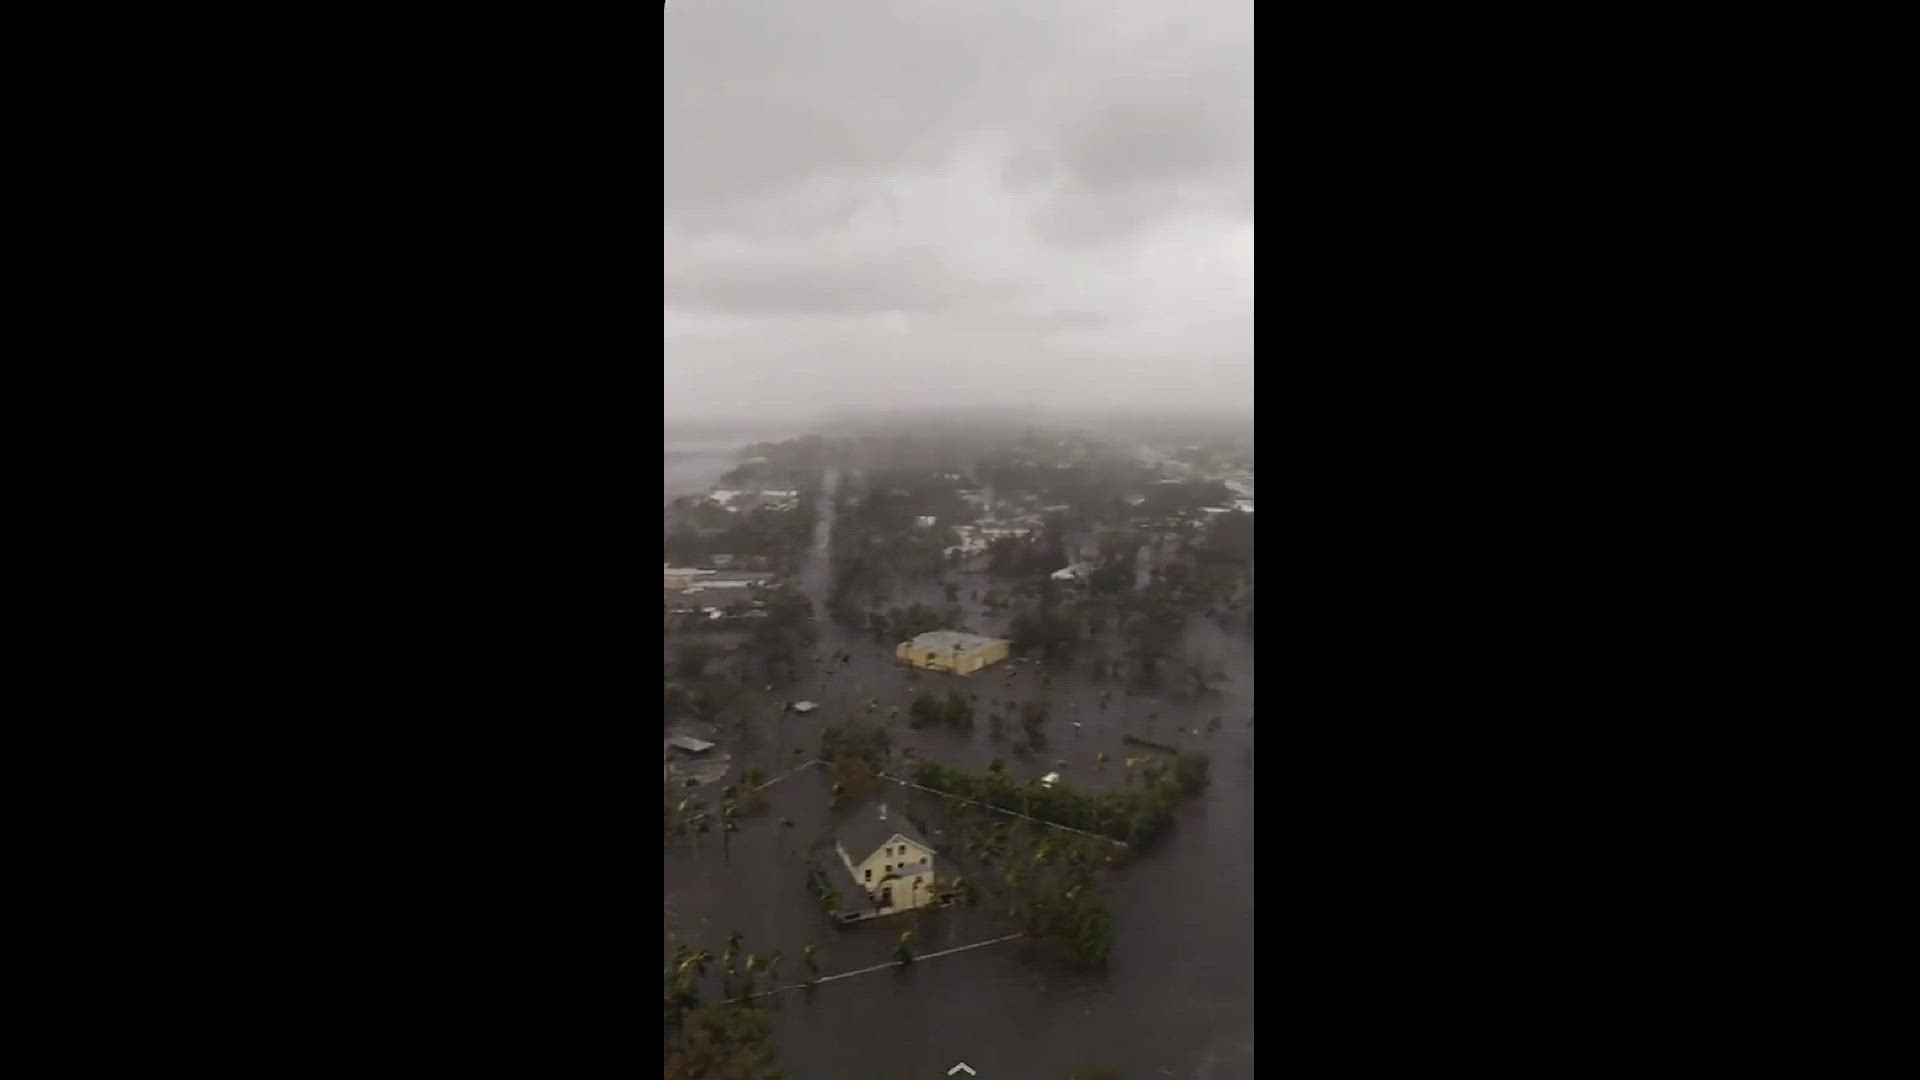 A video taken from an apartment in downtown Ft. Myers shows major flooding from Hurricane Ian.